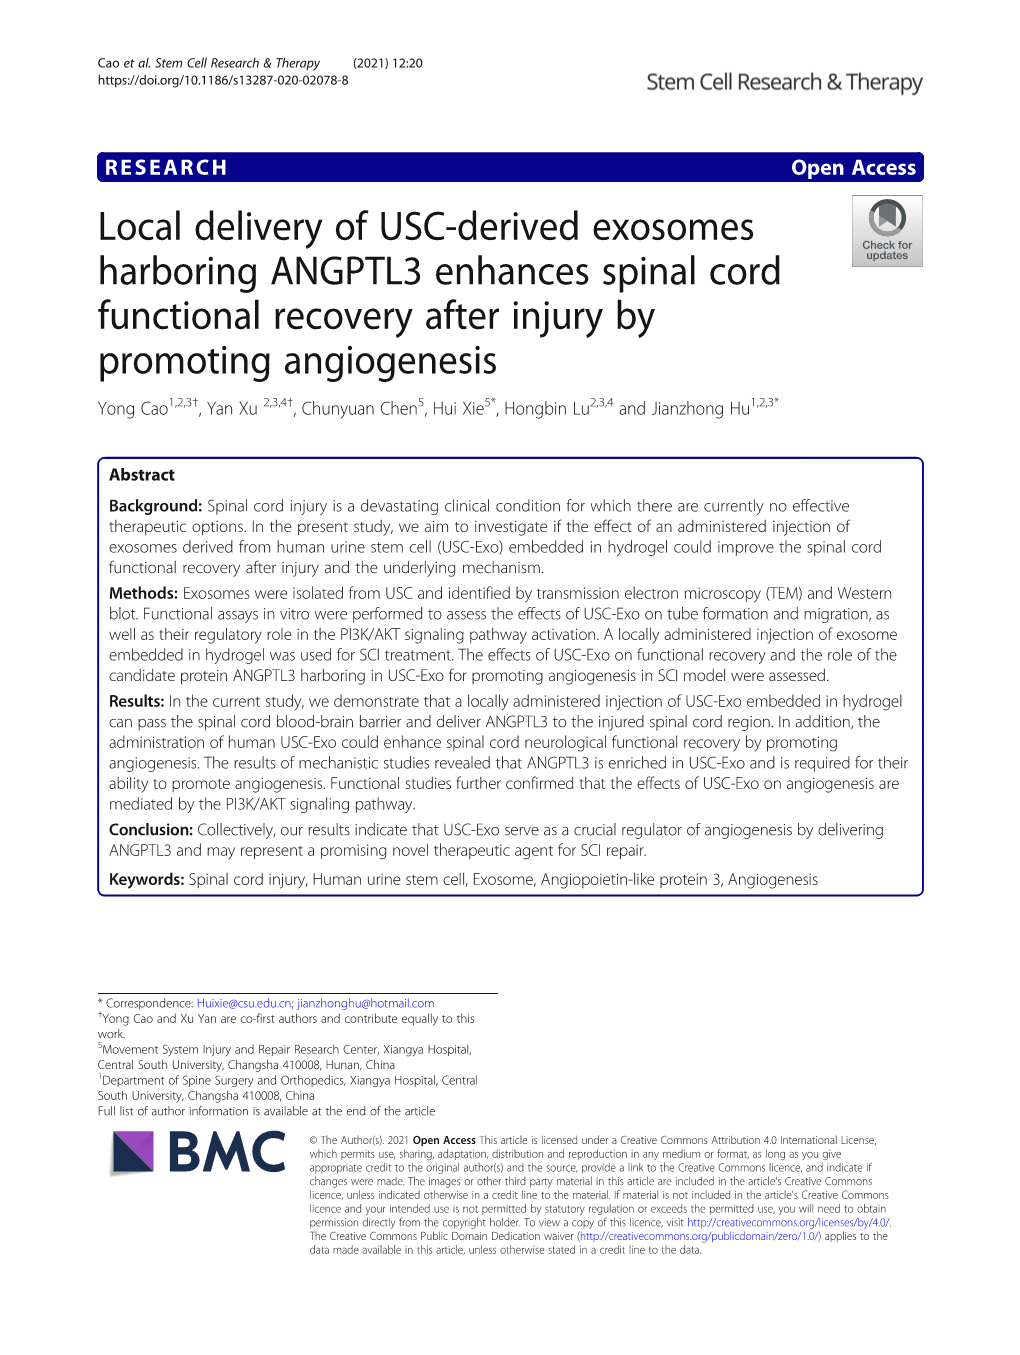 Local Delivery of USC-Derived Exosomes Harboring ANGPTL3